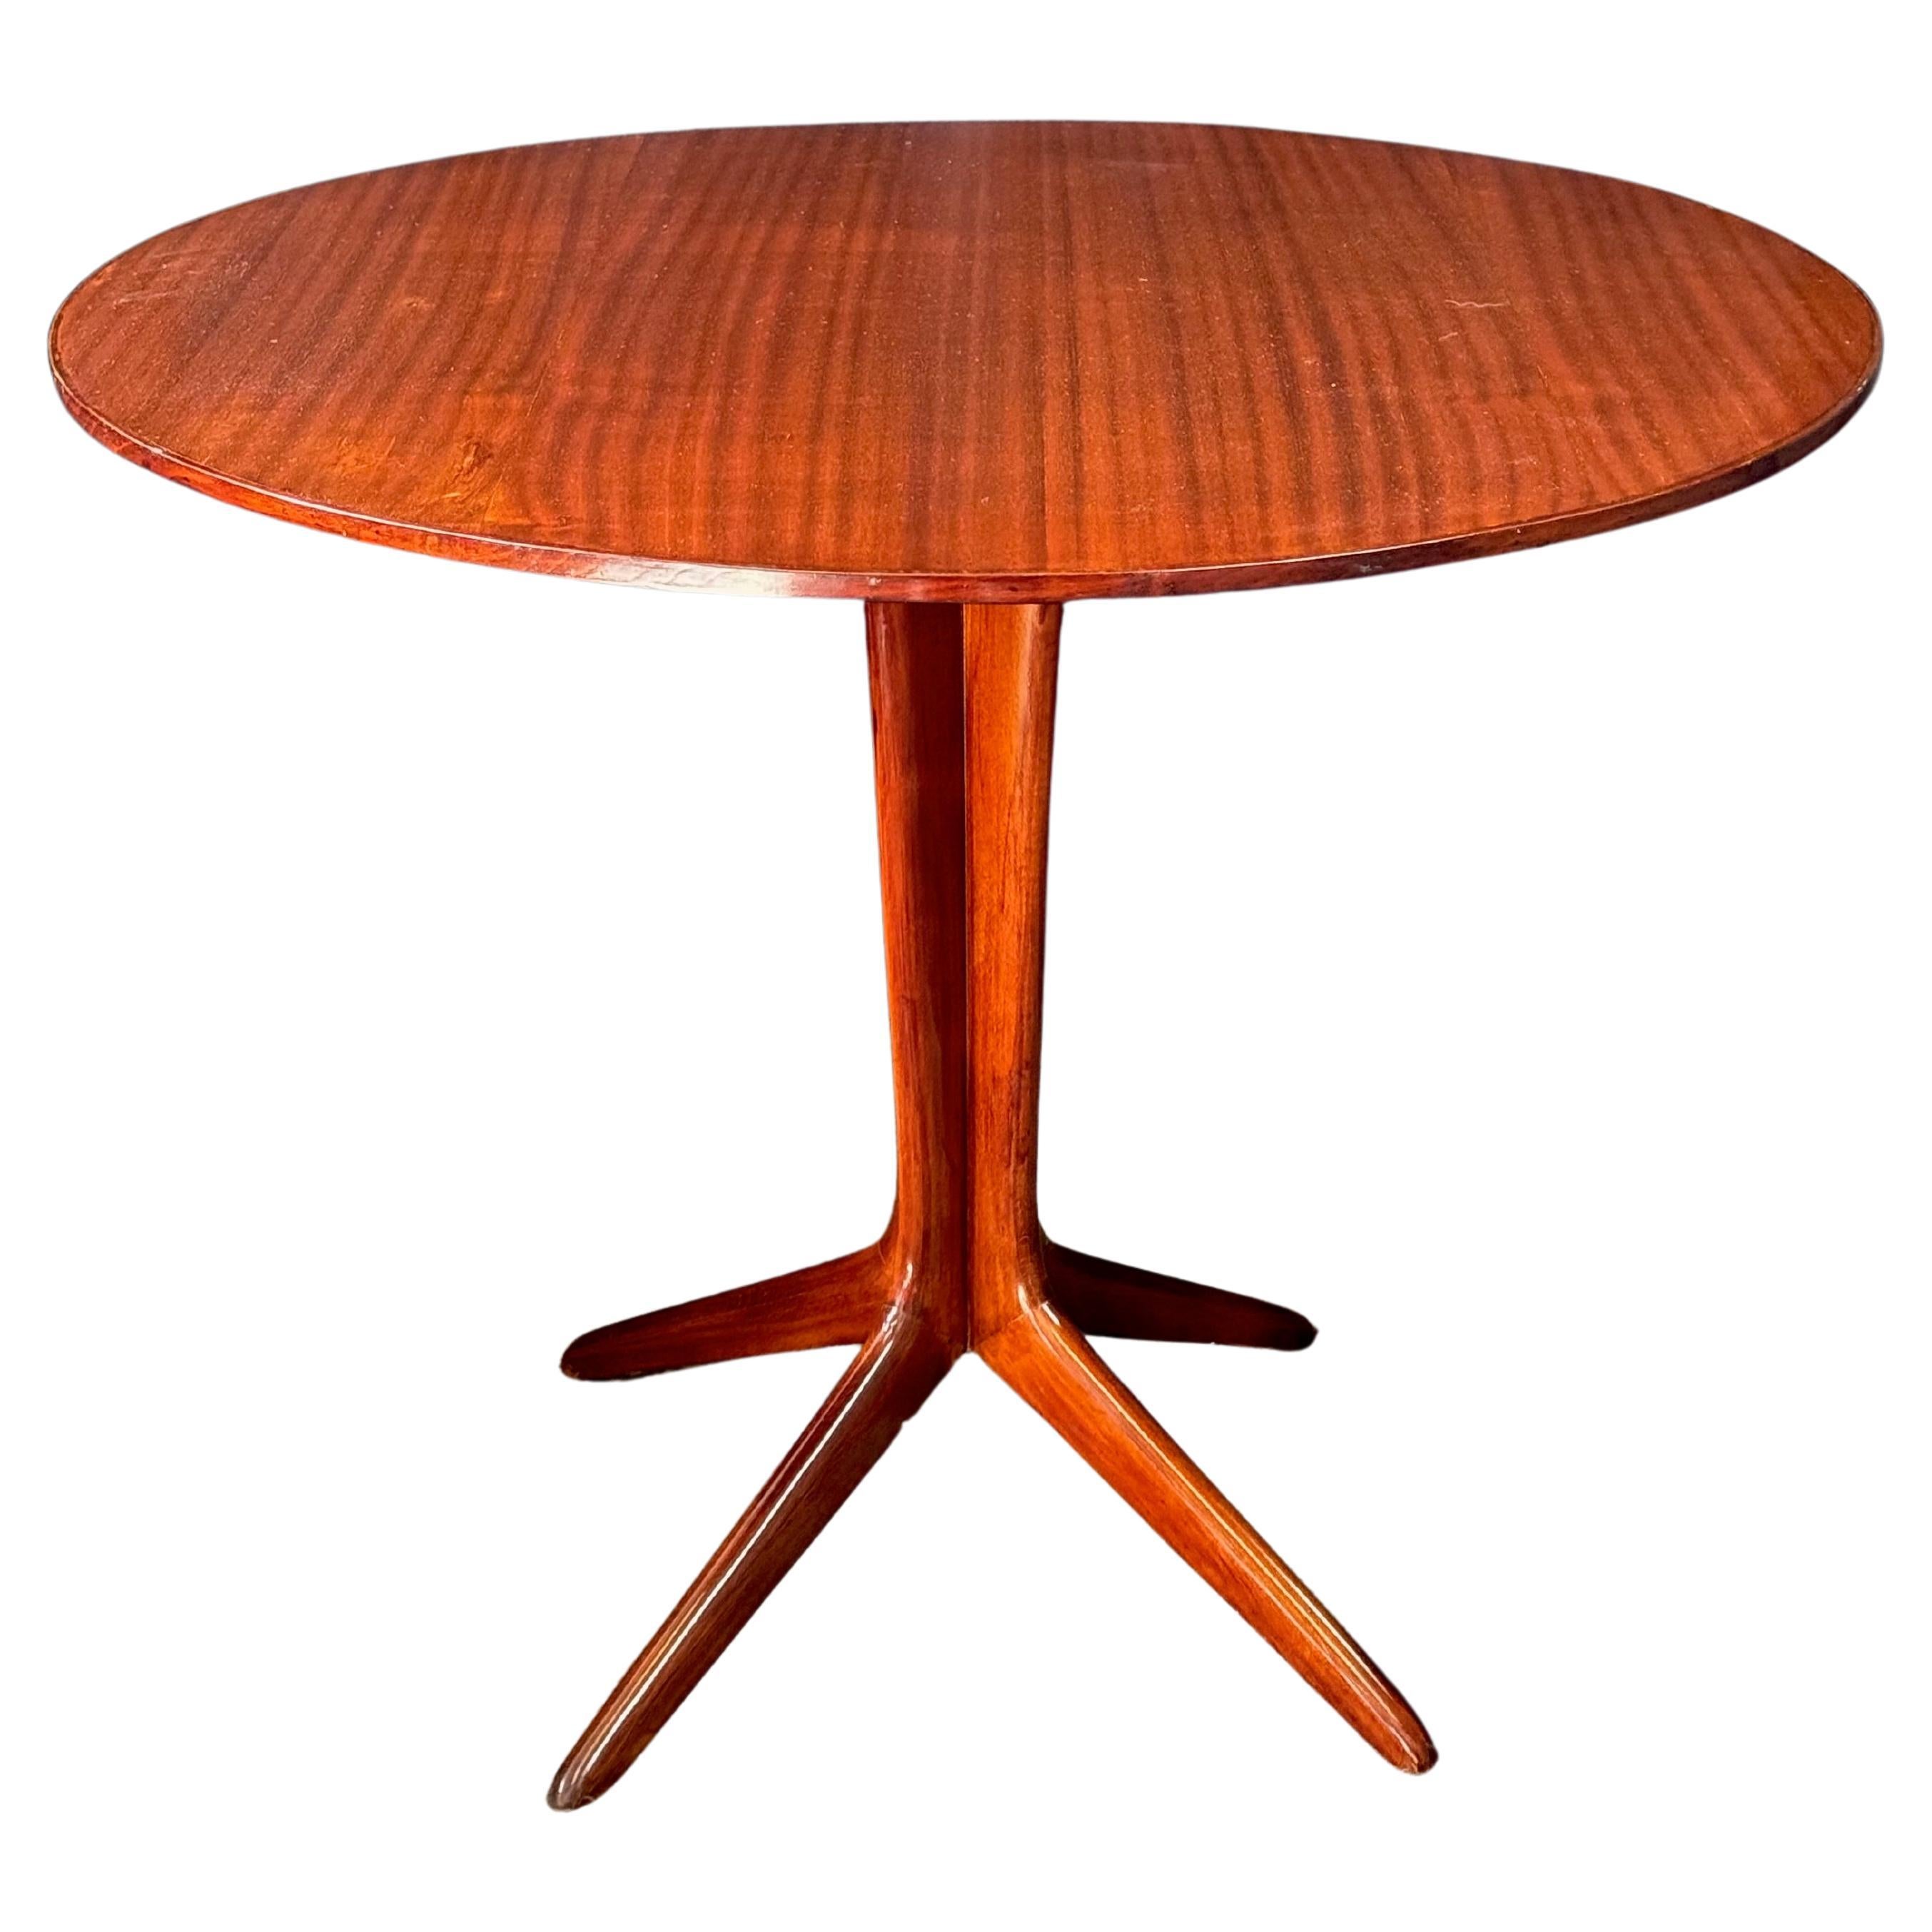 Italian Mid-Century Center Table by Ico and Louisa Parisi